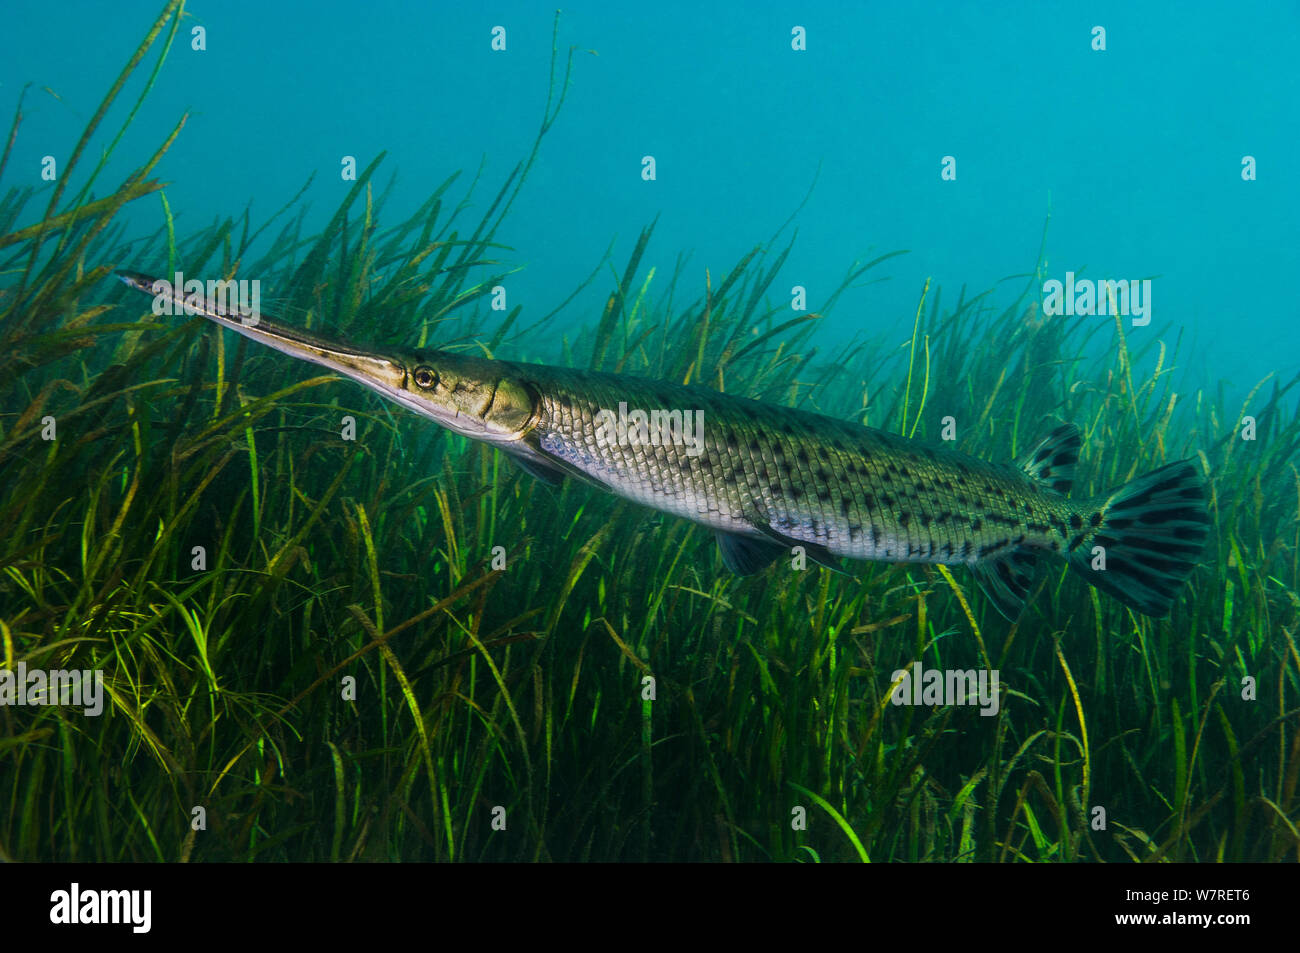 Longnose gar (Lepisosteus osseus) in front of freshwater plants in Rainbow River, Florida, United States of America. Stock Photo